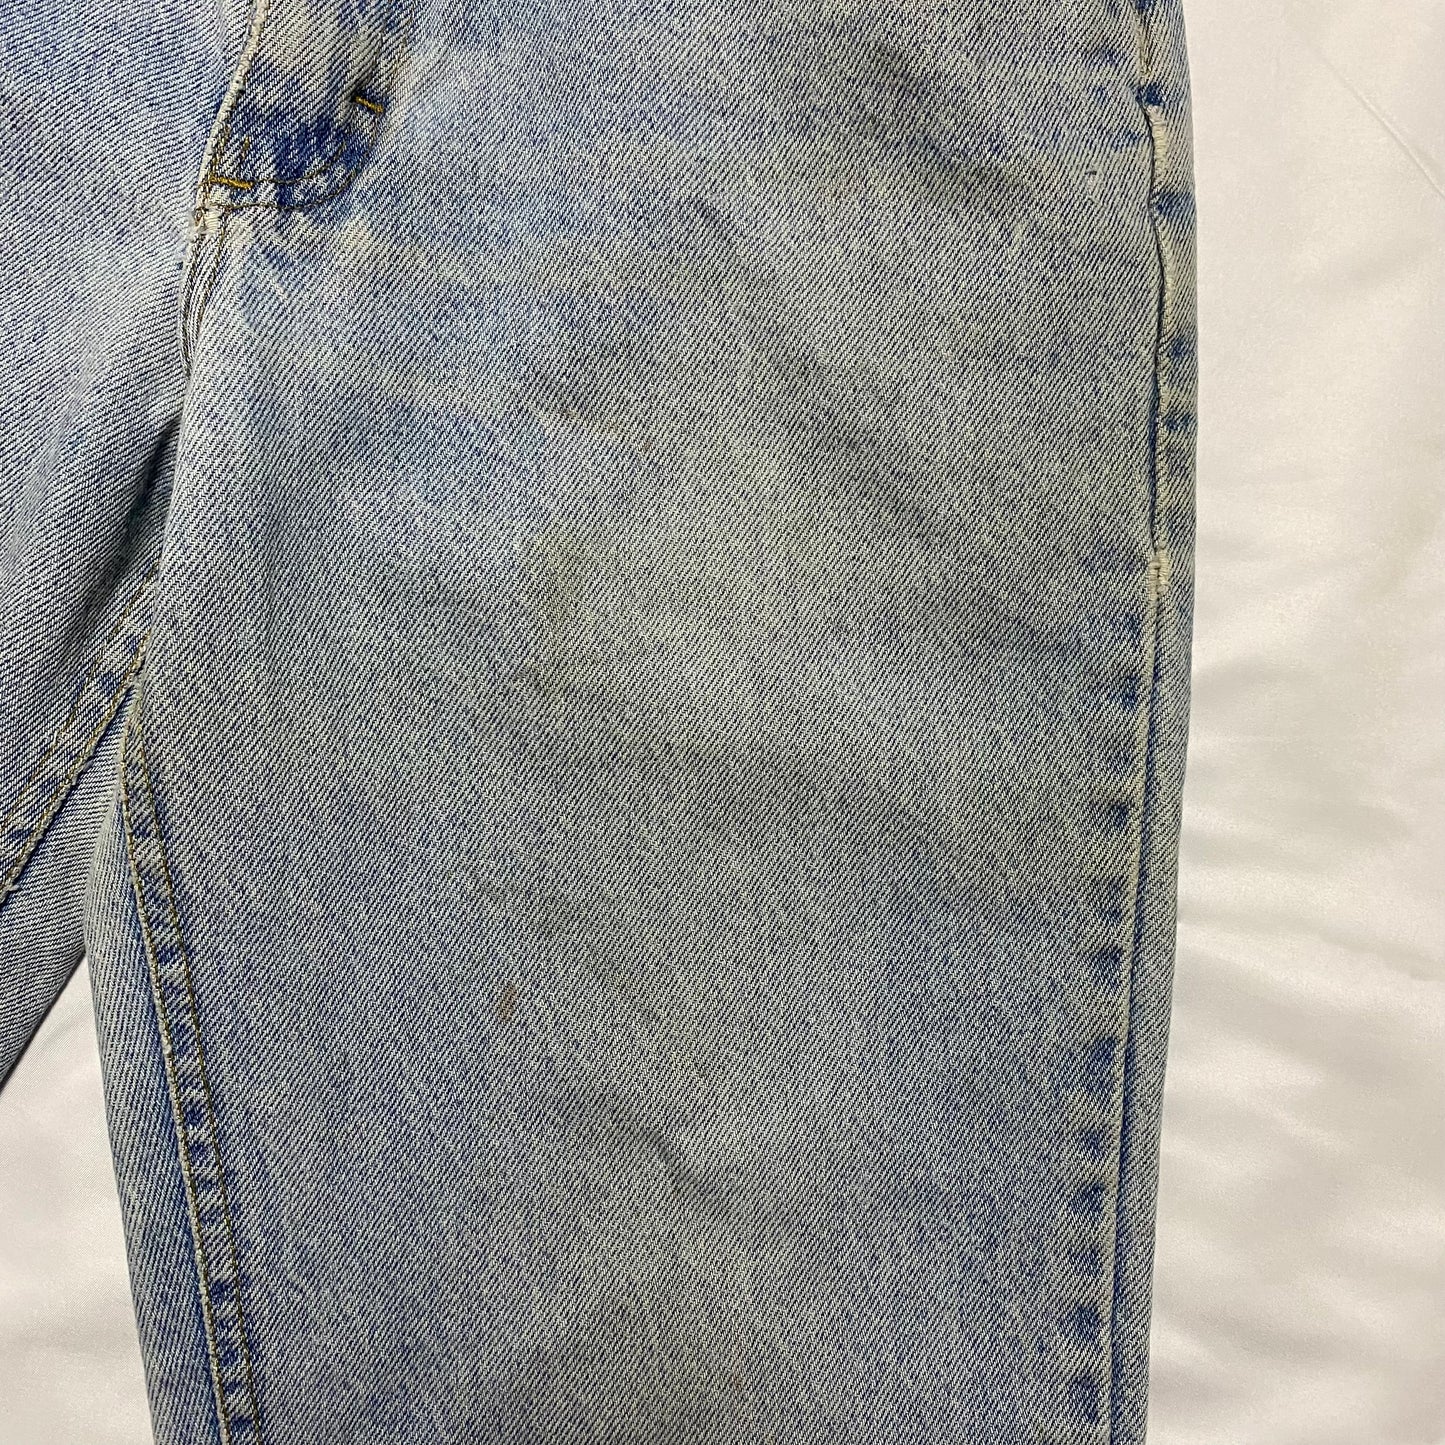 90's LEE JEANS "MADE IN USA"